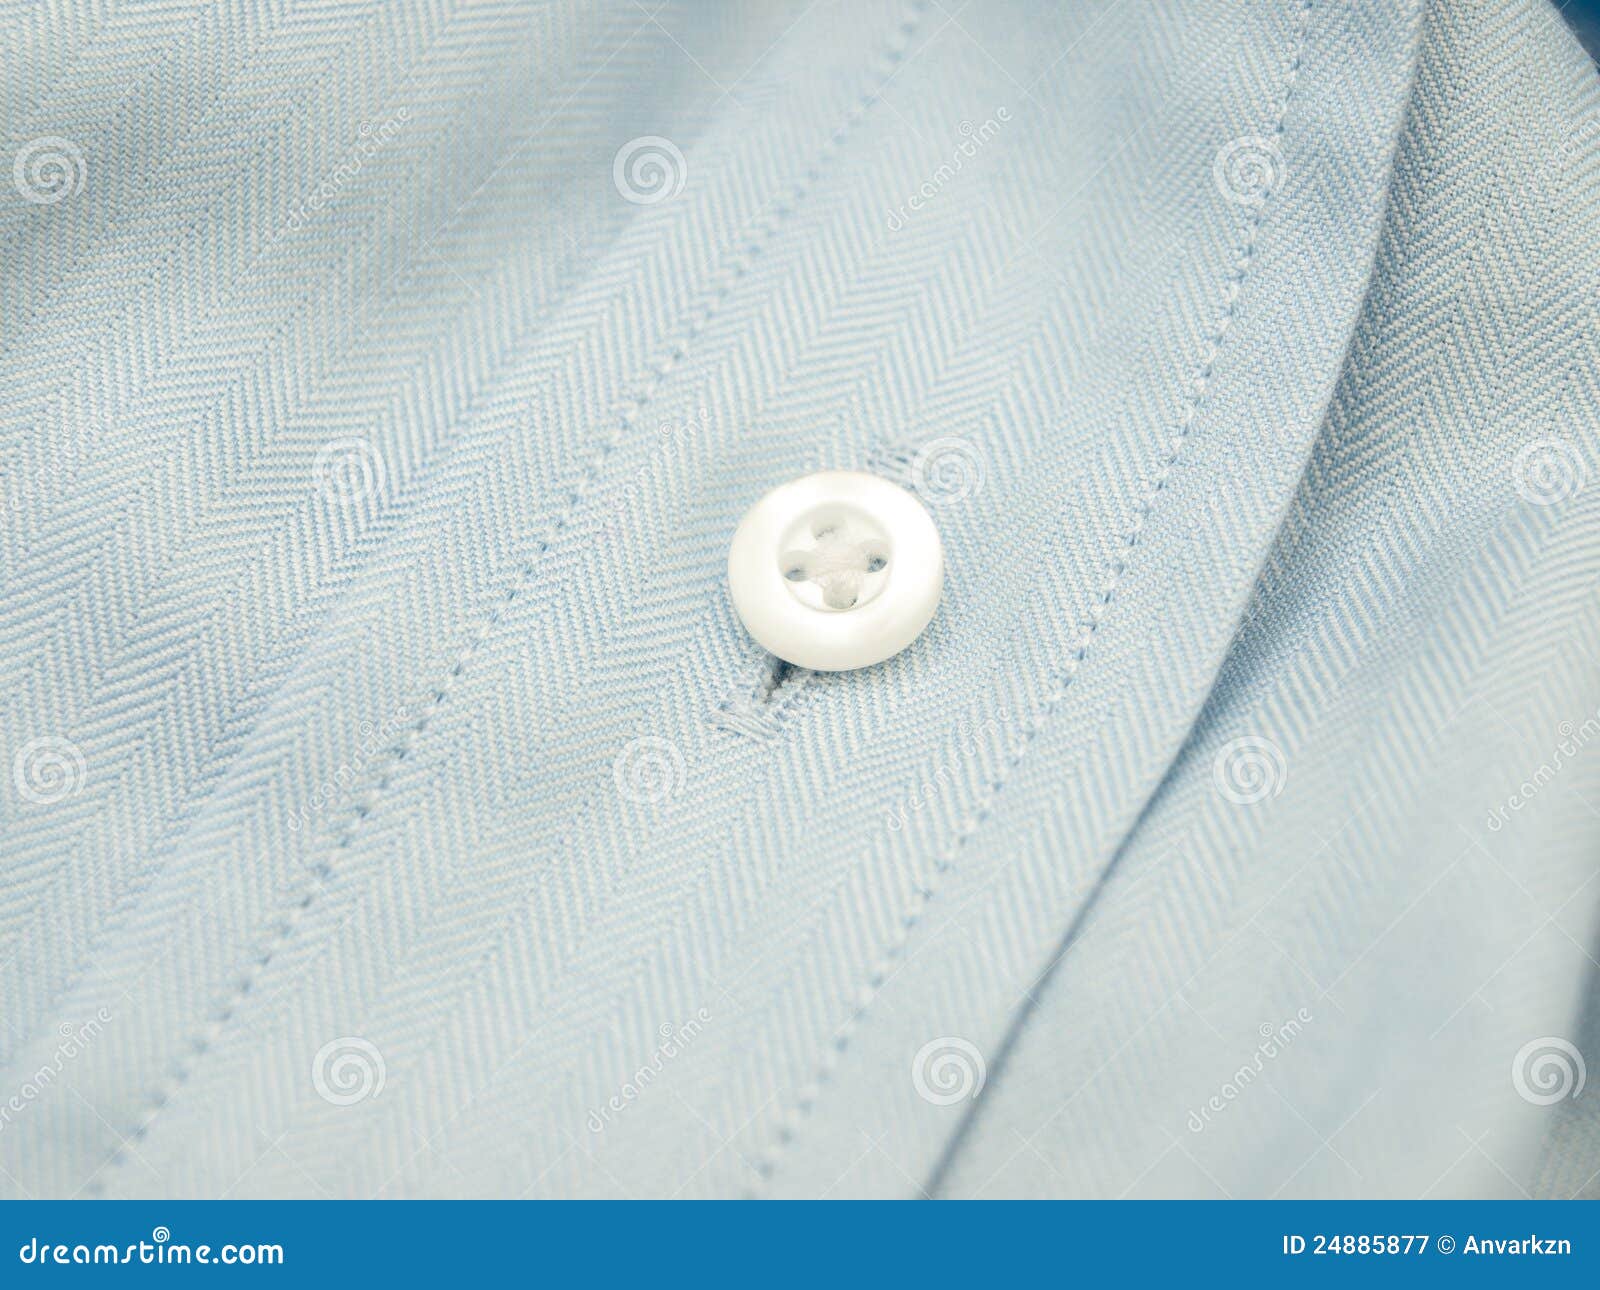 A Button on a Finest-quality Shirt Stock Image - Image of shirt, blue ...